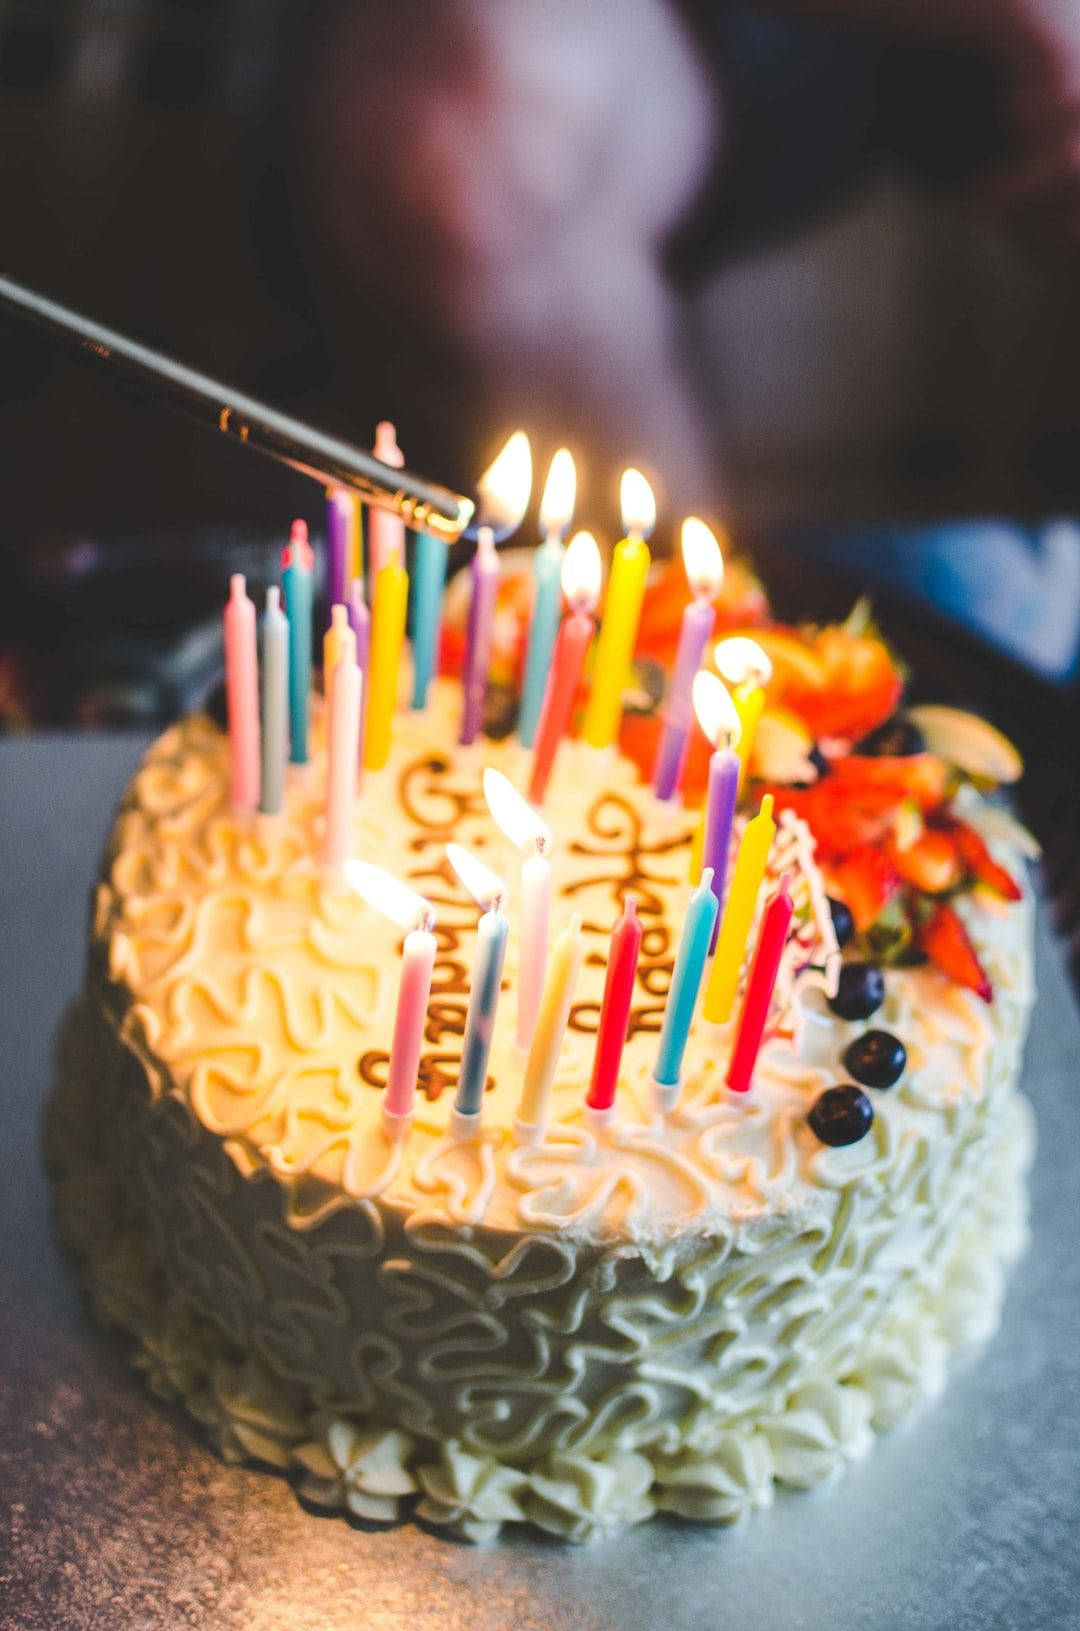 Birthday Cake With Multiple Lit Candles Wallpaper